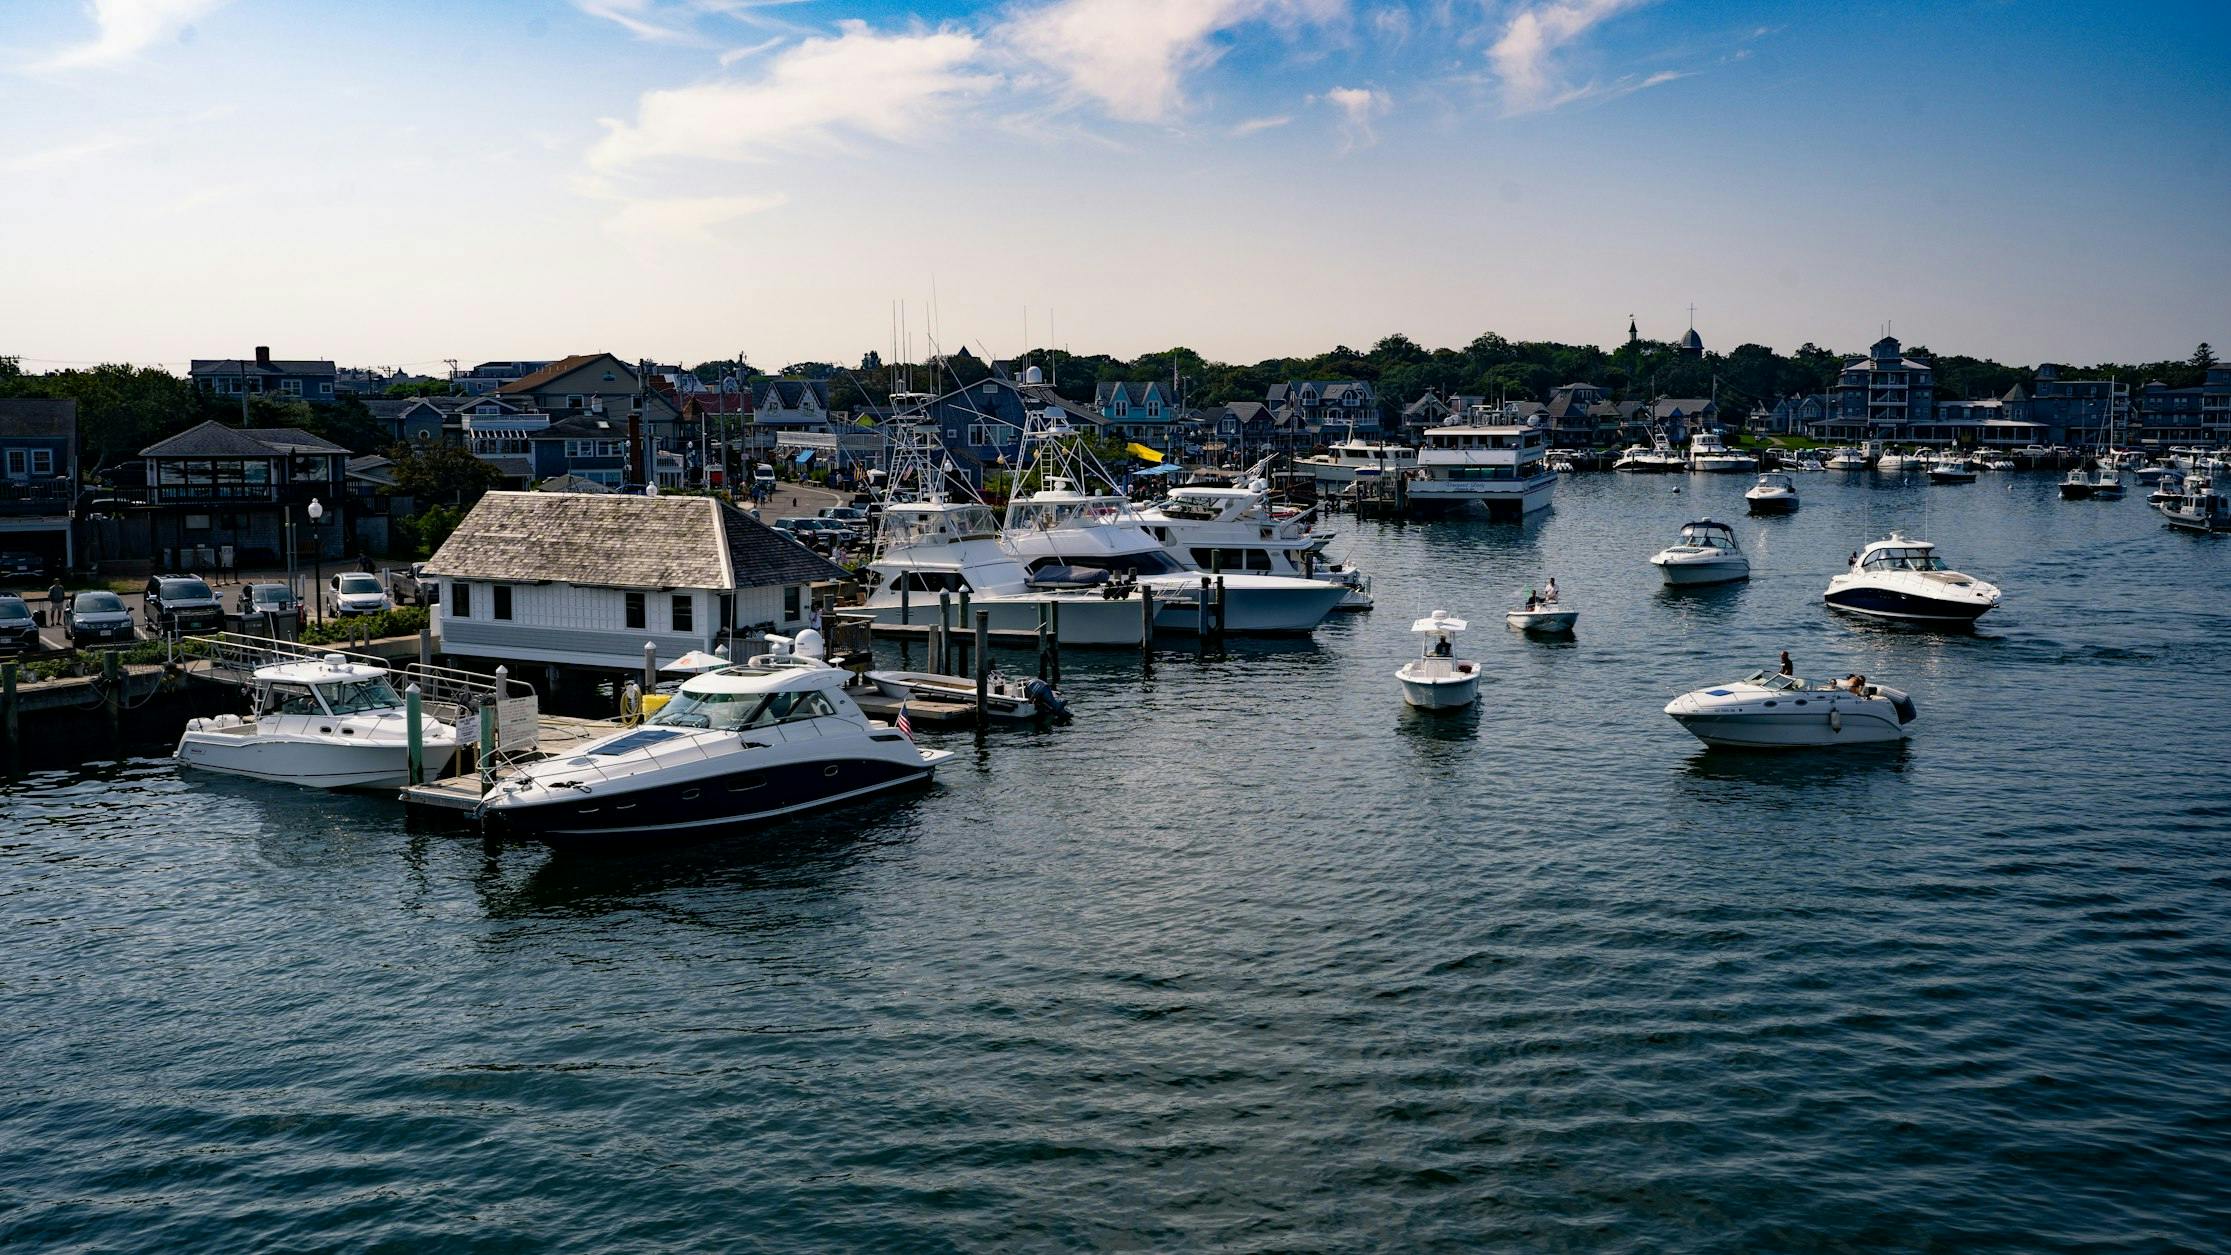 Renting Vacation Homes on Martha's Vineyard Made Easy!